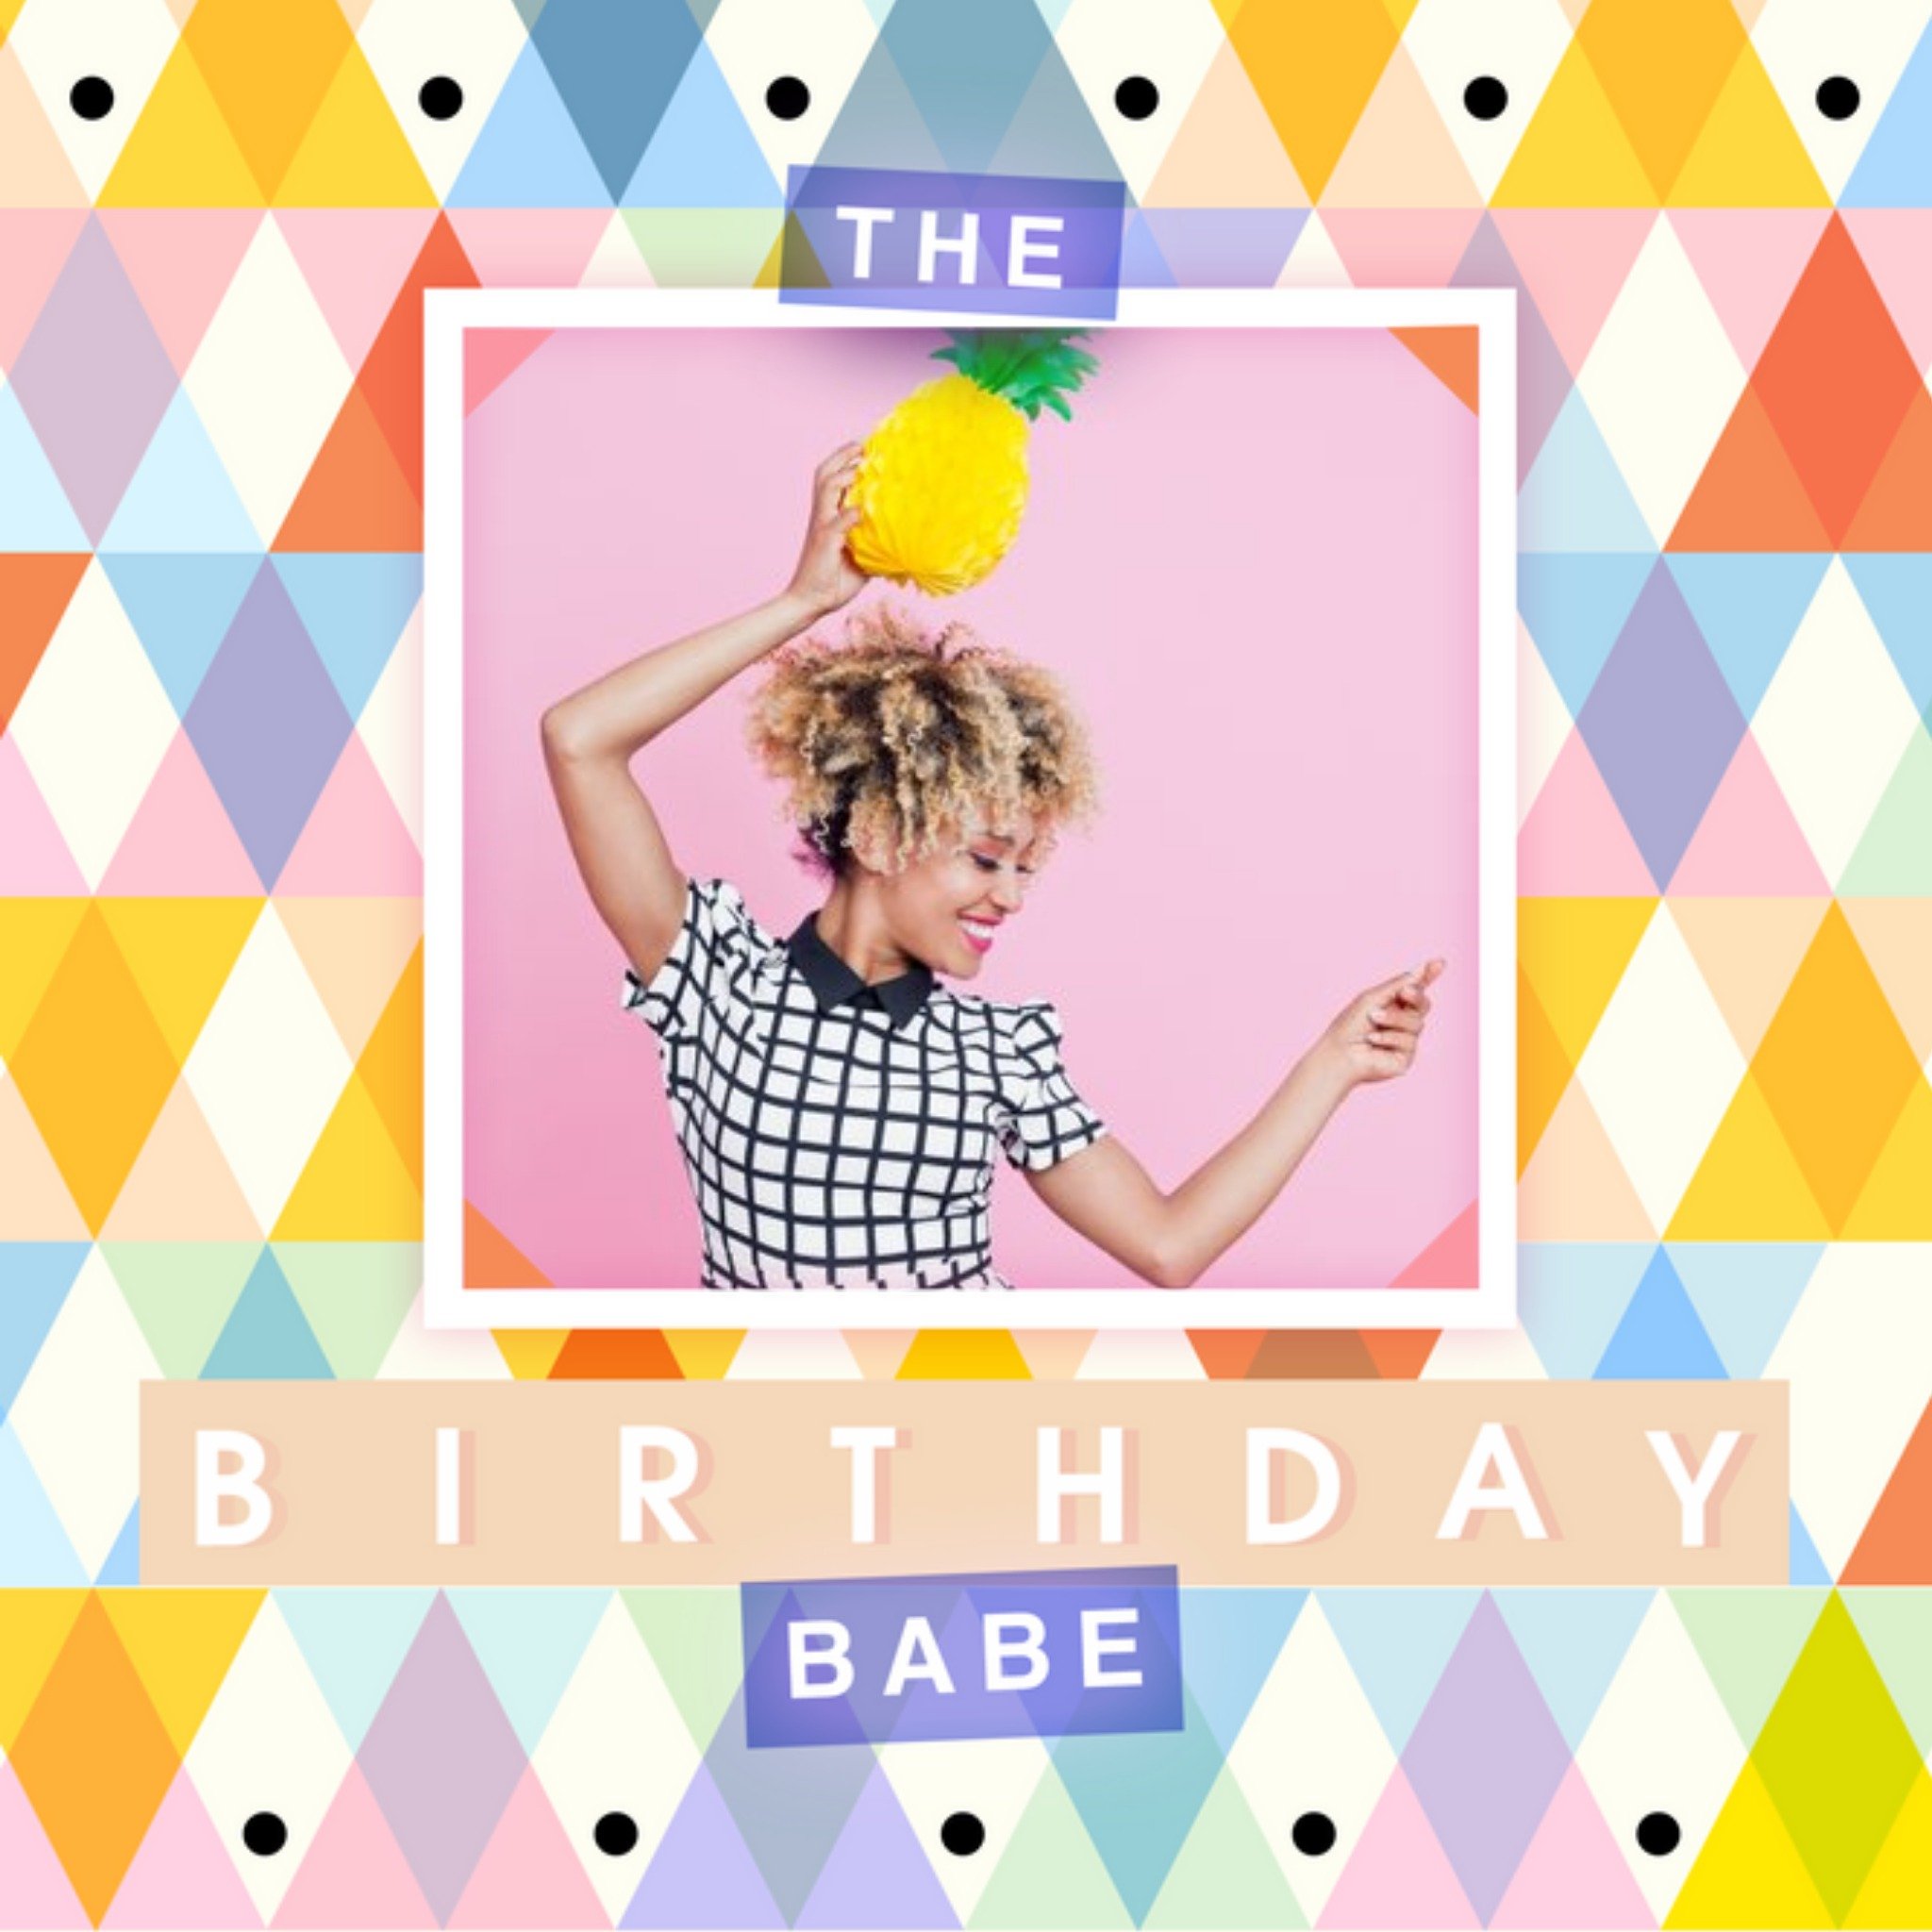 Moonpig Colourful And Geometric The Birthday Babe Photo Card, Large